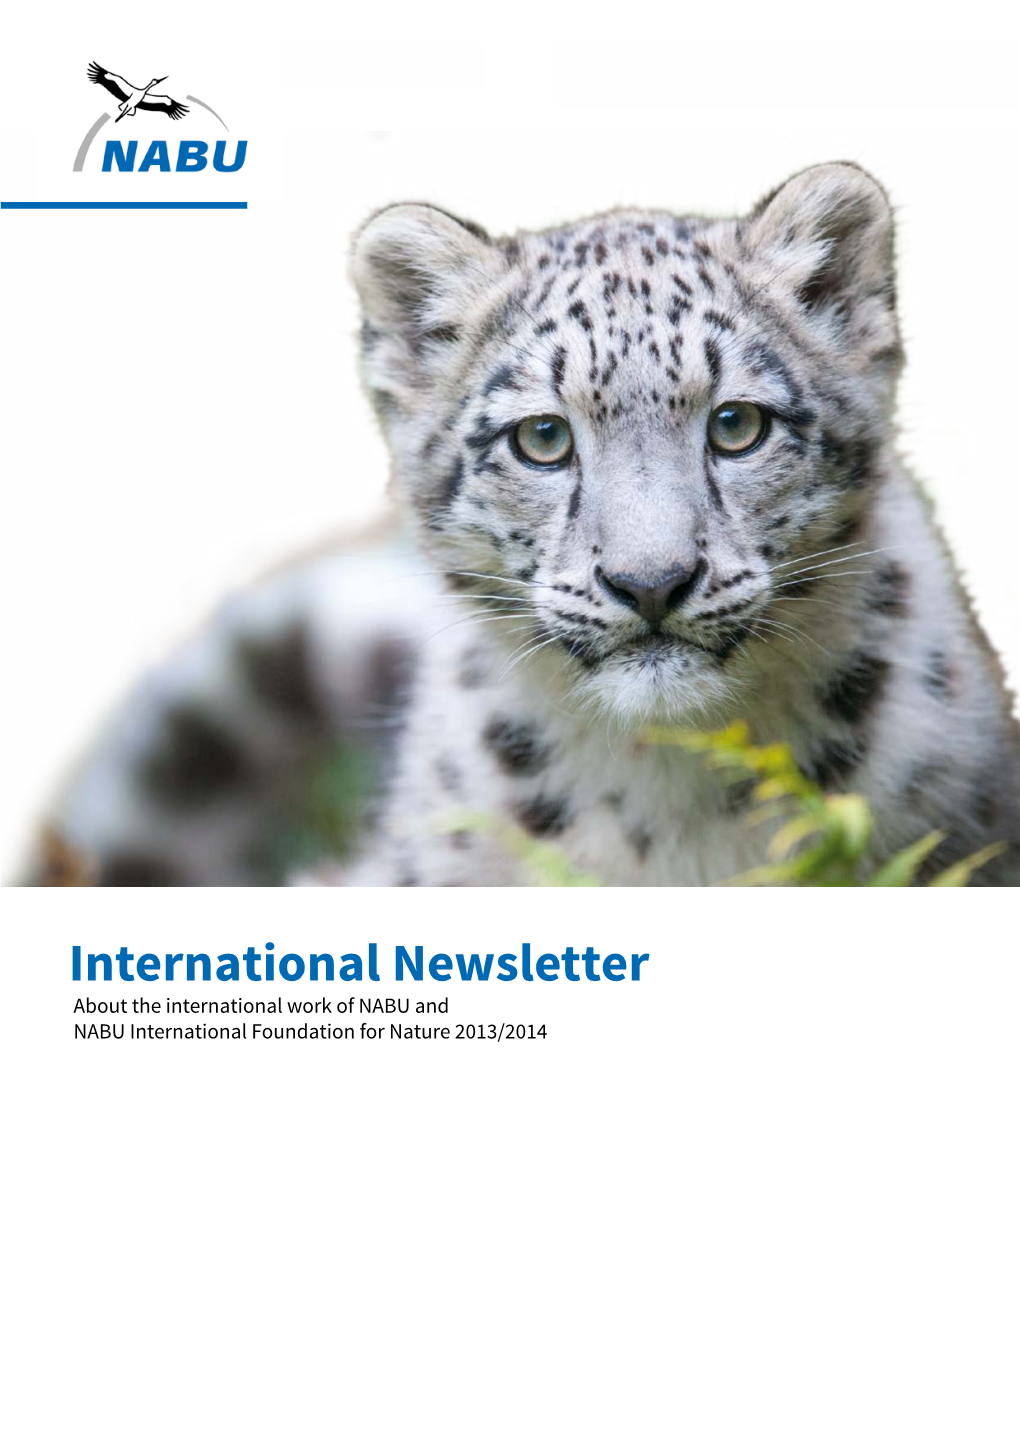 International Newsletter About the International Work of NABU and NABU International Foundation for Nature 2013/2014 2 | IMPRINT